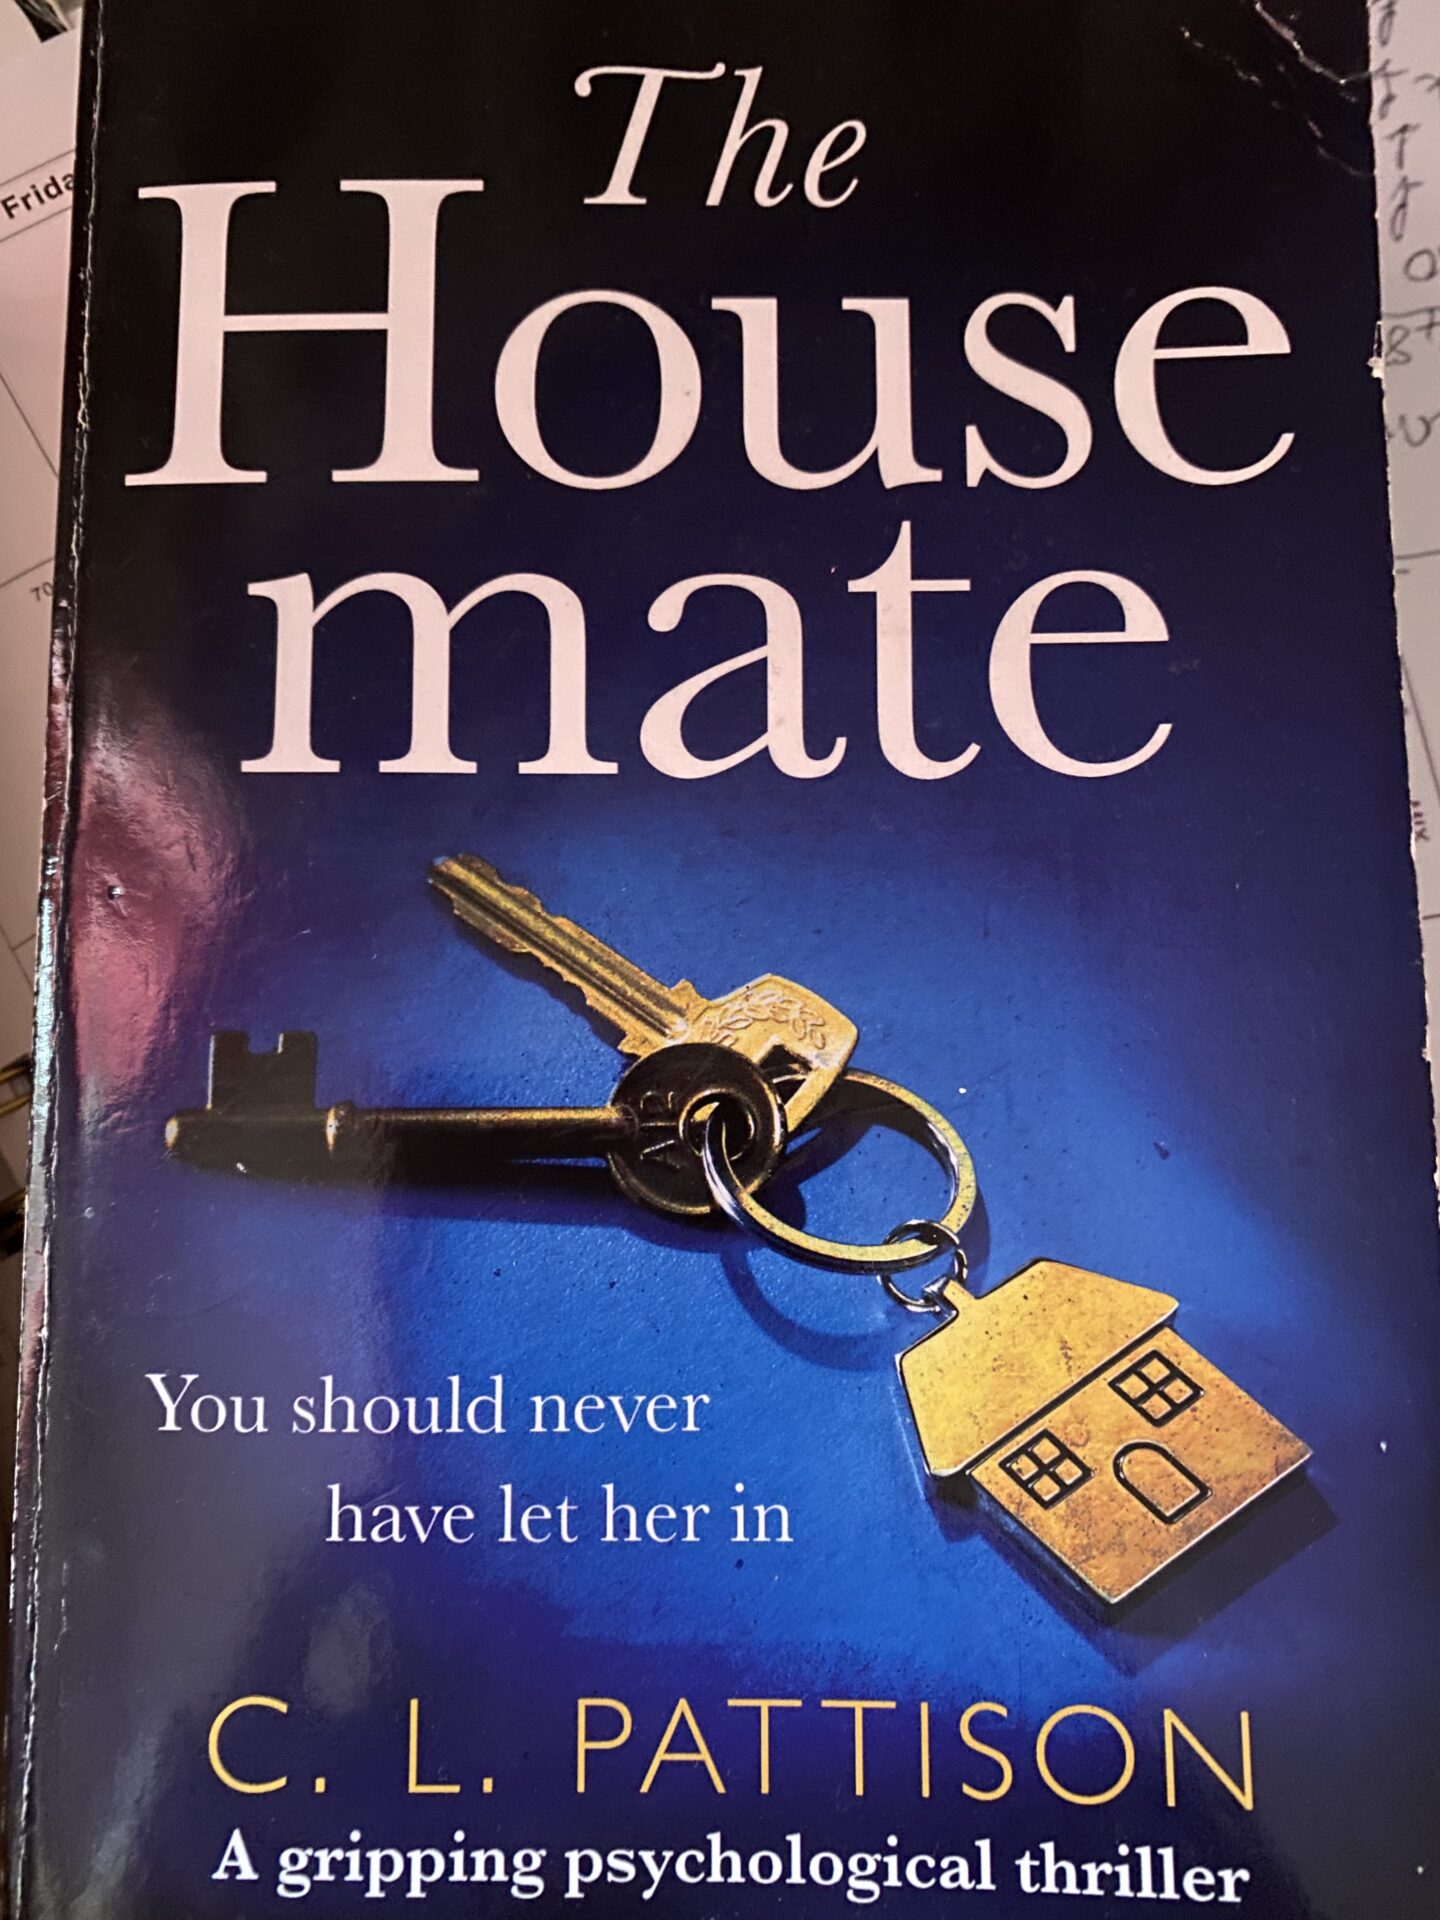 THE HOUSEMATE BY C.L. PATTISON – BOOK REVIEW